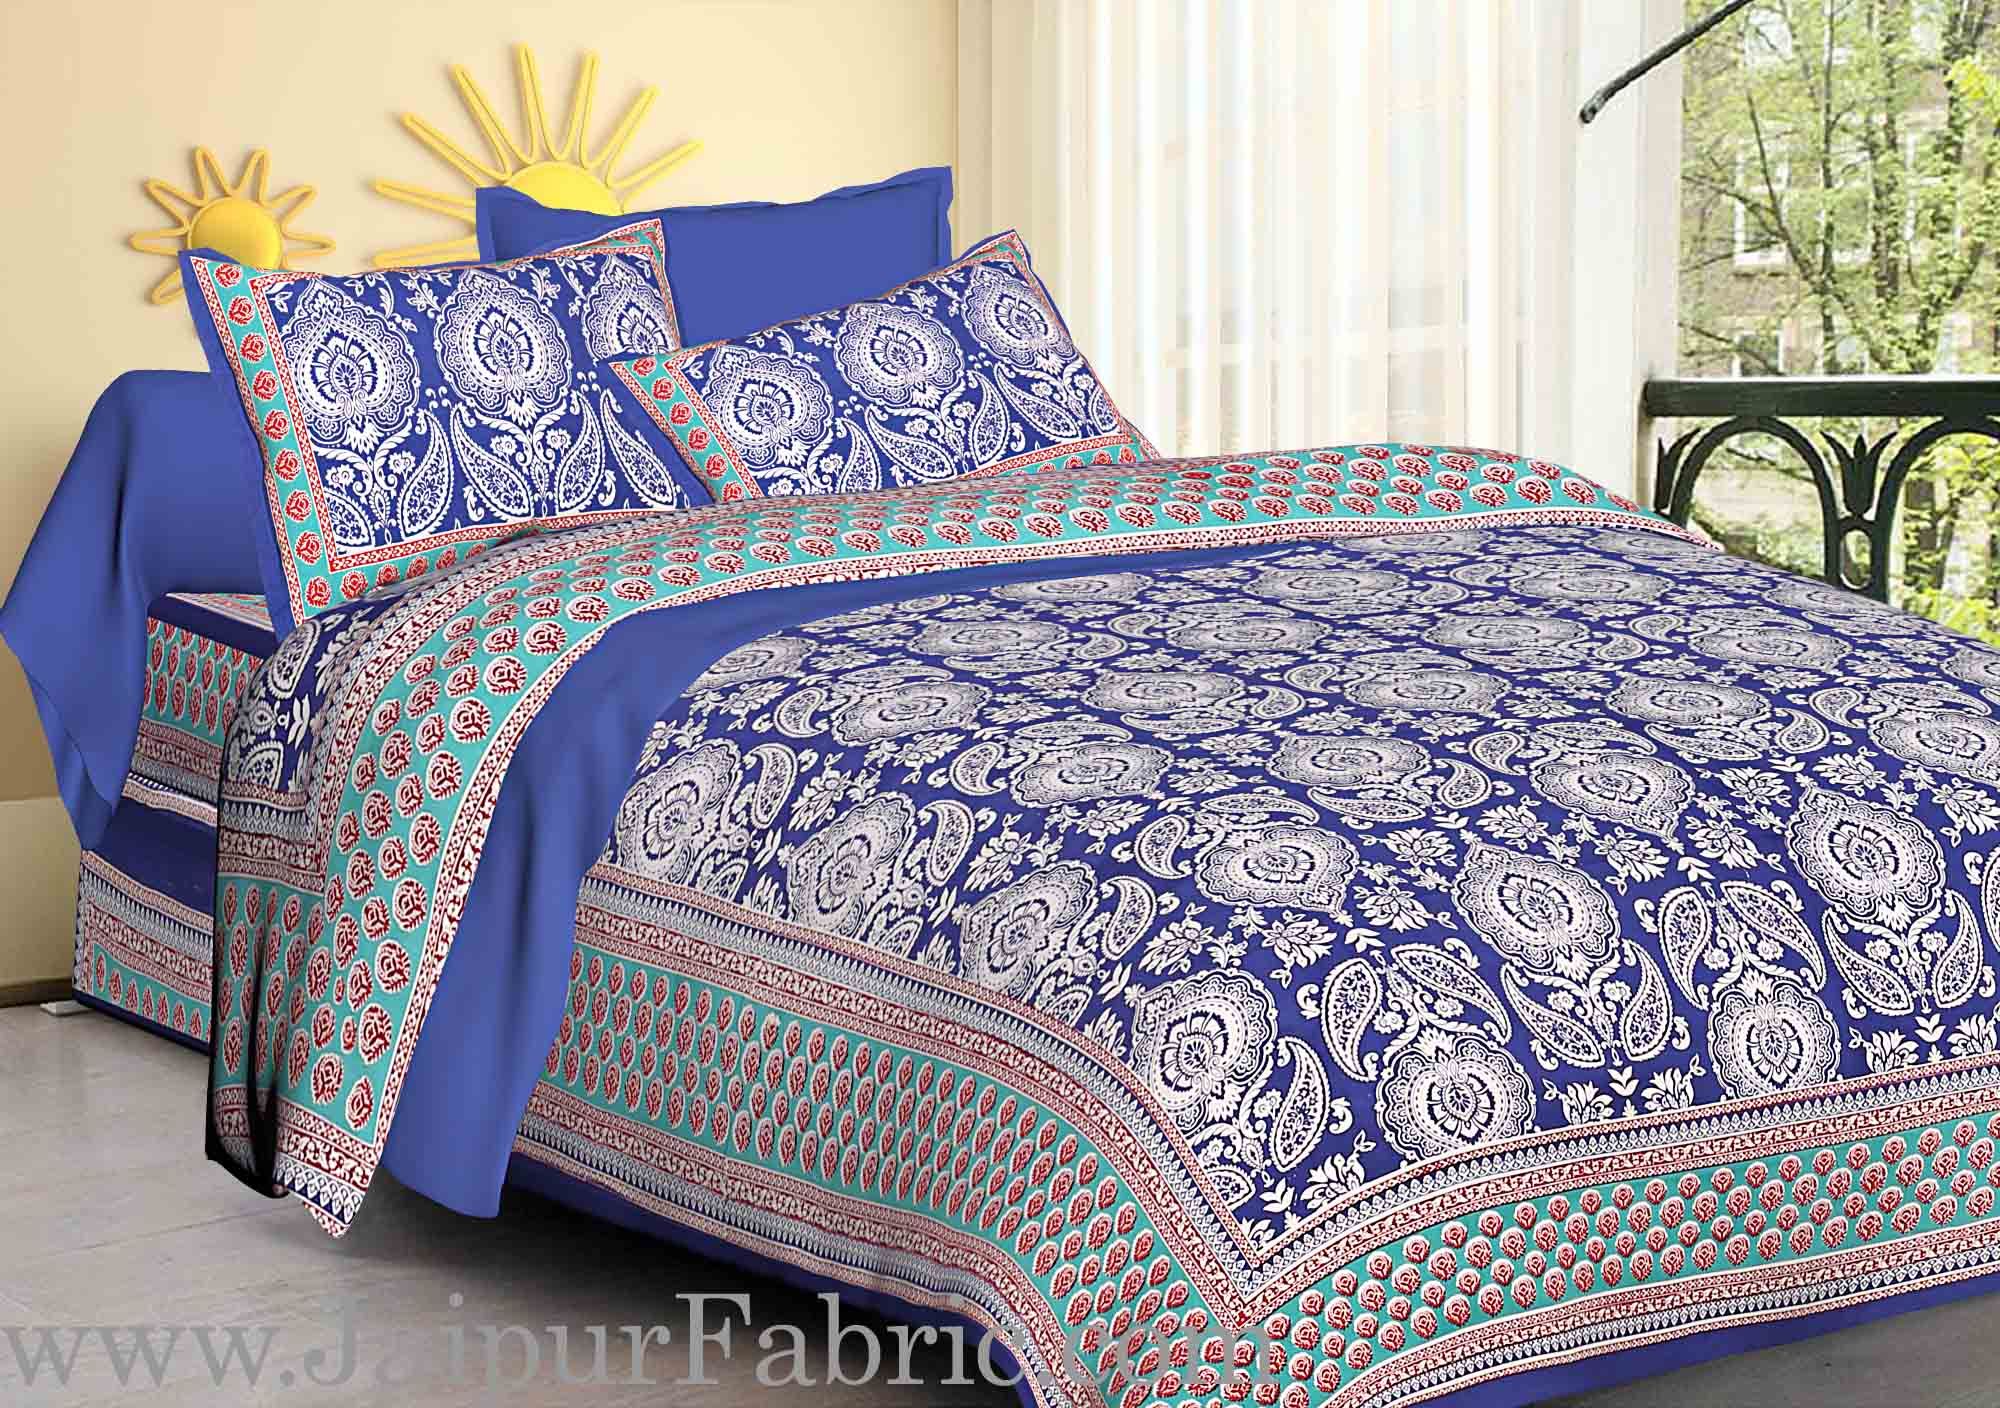 Blue Border Large Booty Print Cotton Double Bed Sheet